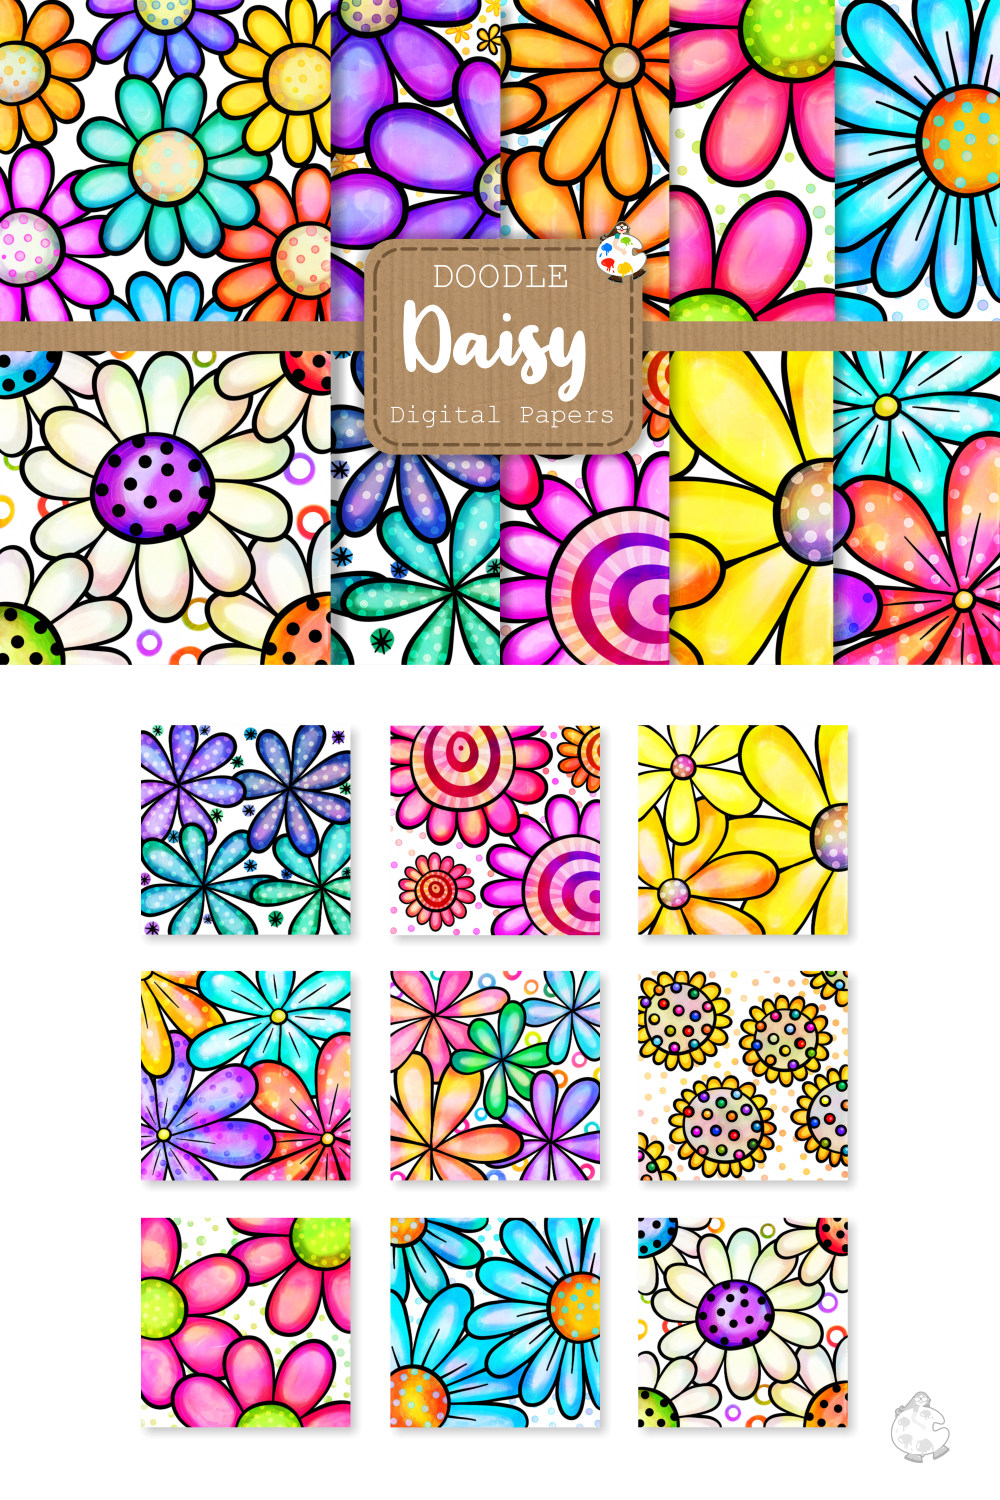 Watercolor Ink Big Doodle Daisy Flower Pattern Papers pinterest image.